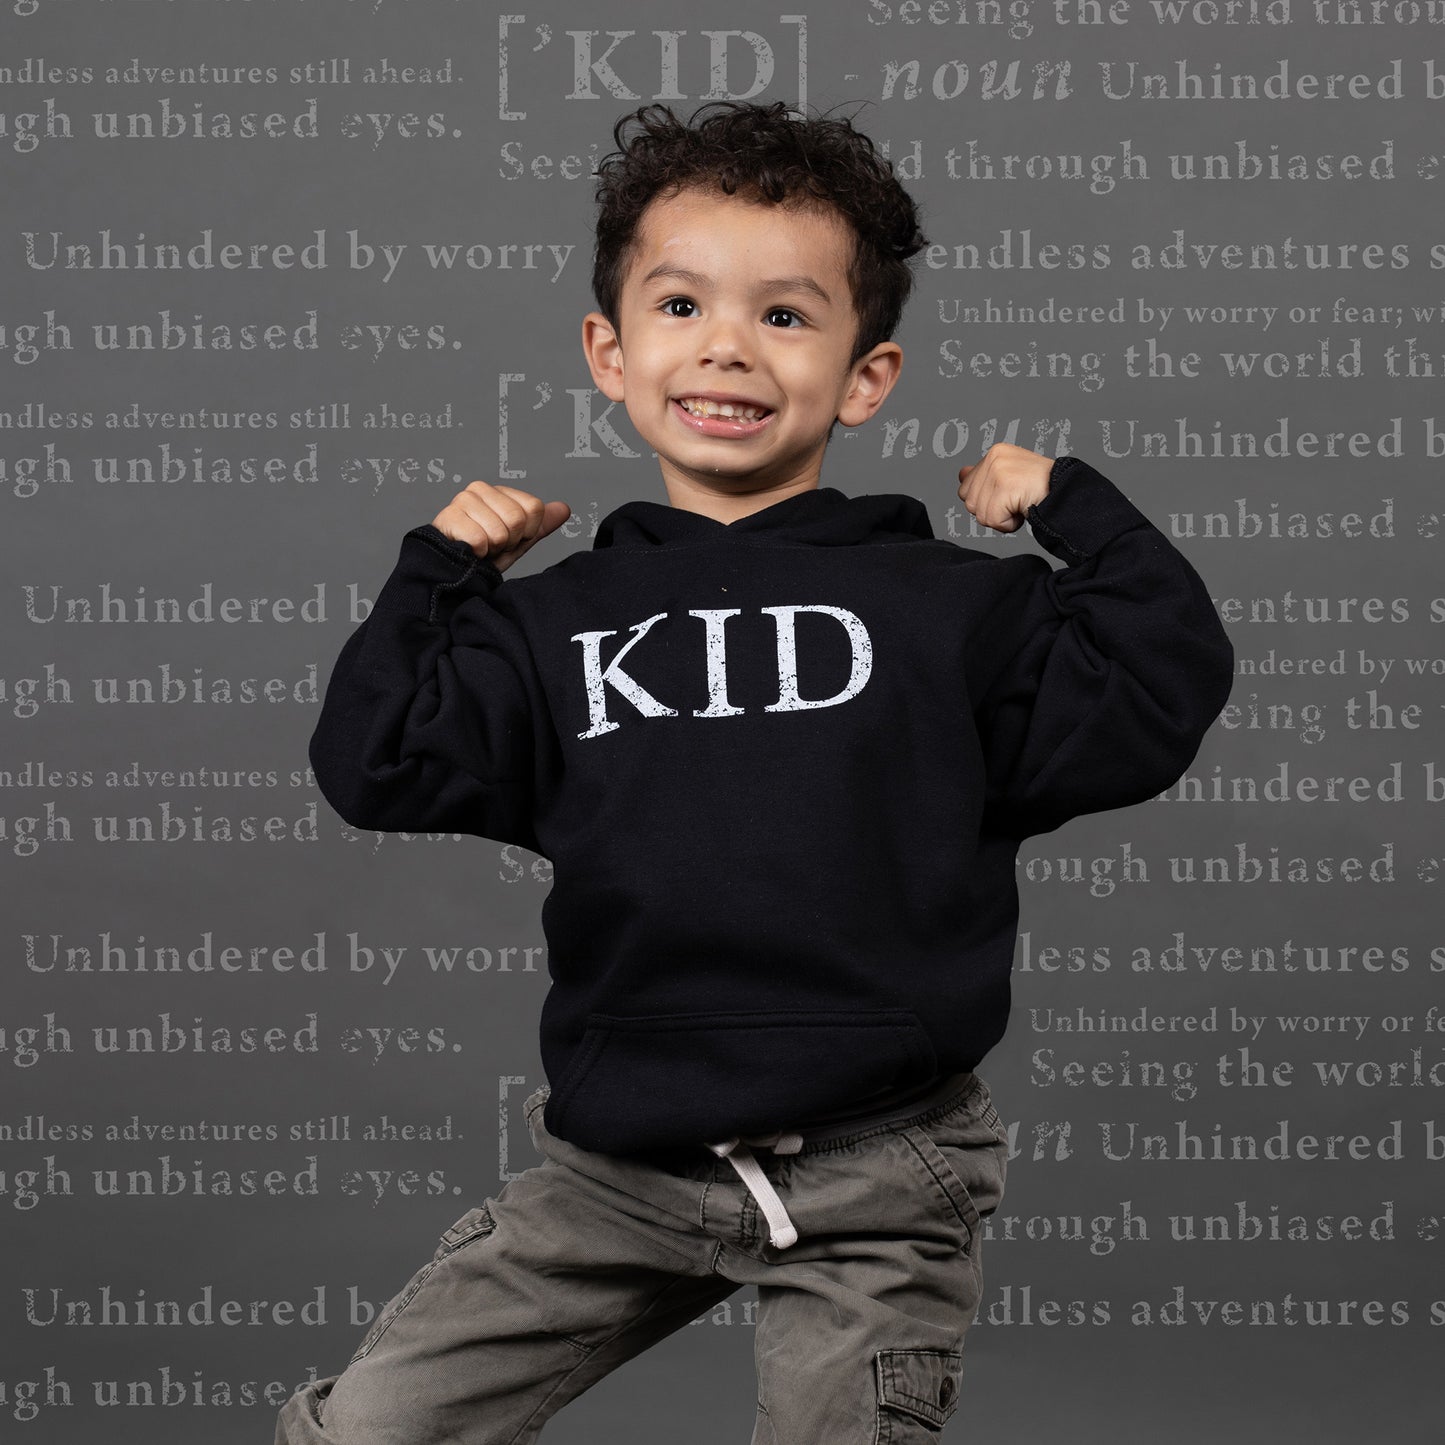 Kid Defined - Matching Shirt for Kids and Adults - Patriotic Apparel 